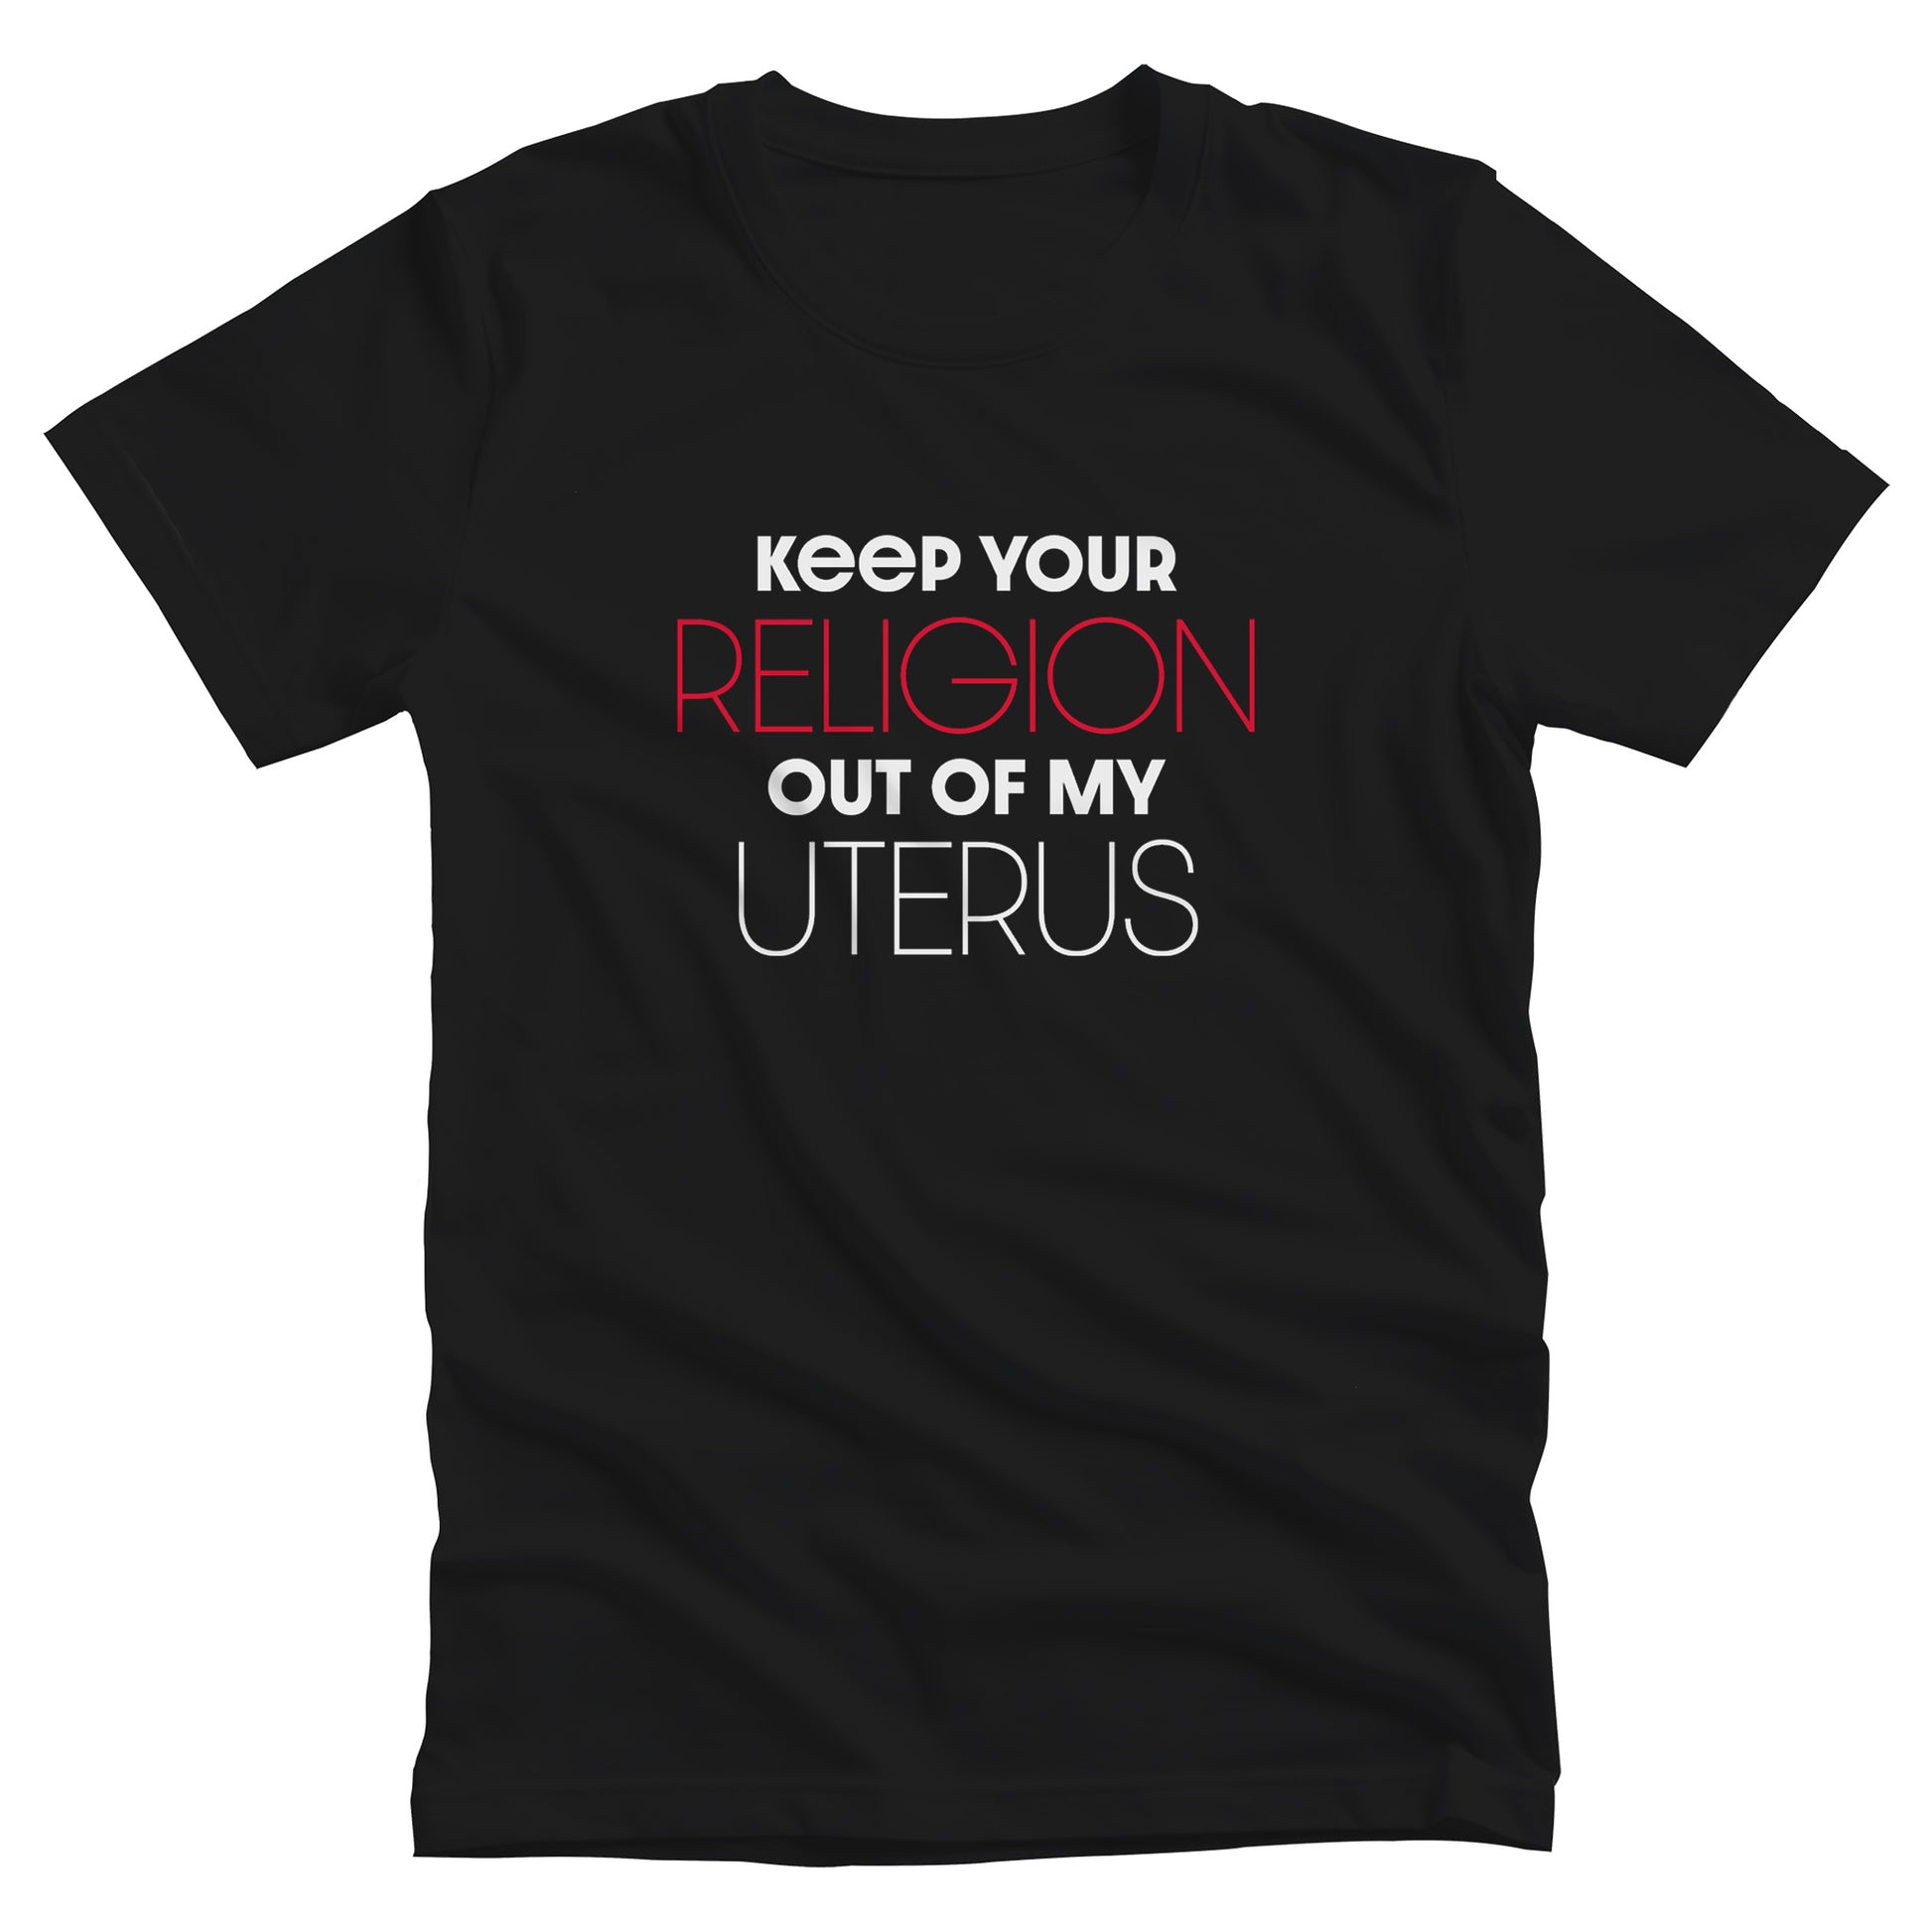 Black unisex t-shirt that says, “Keep Your Religion Out of My Uterus” in all caps. “Keep Your” is bold, “Religion” is on the next line, is a larger size, and is red, “out of my” is beneath that and in bold, and “uterus” is on the last line